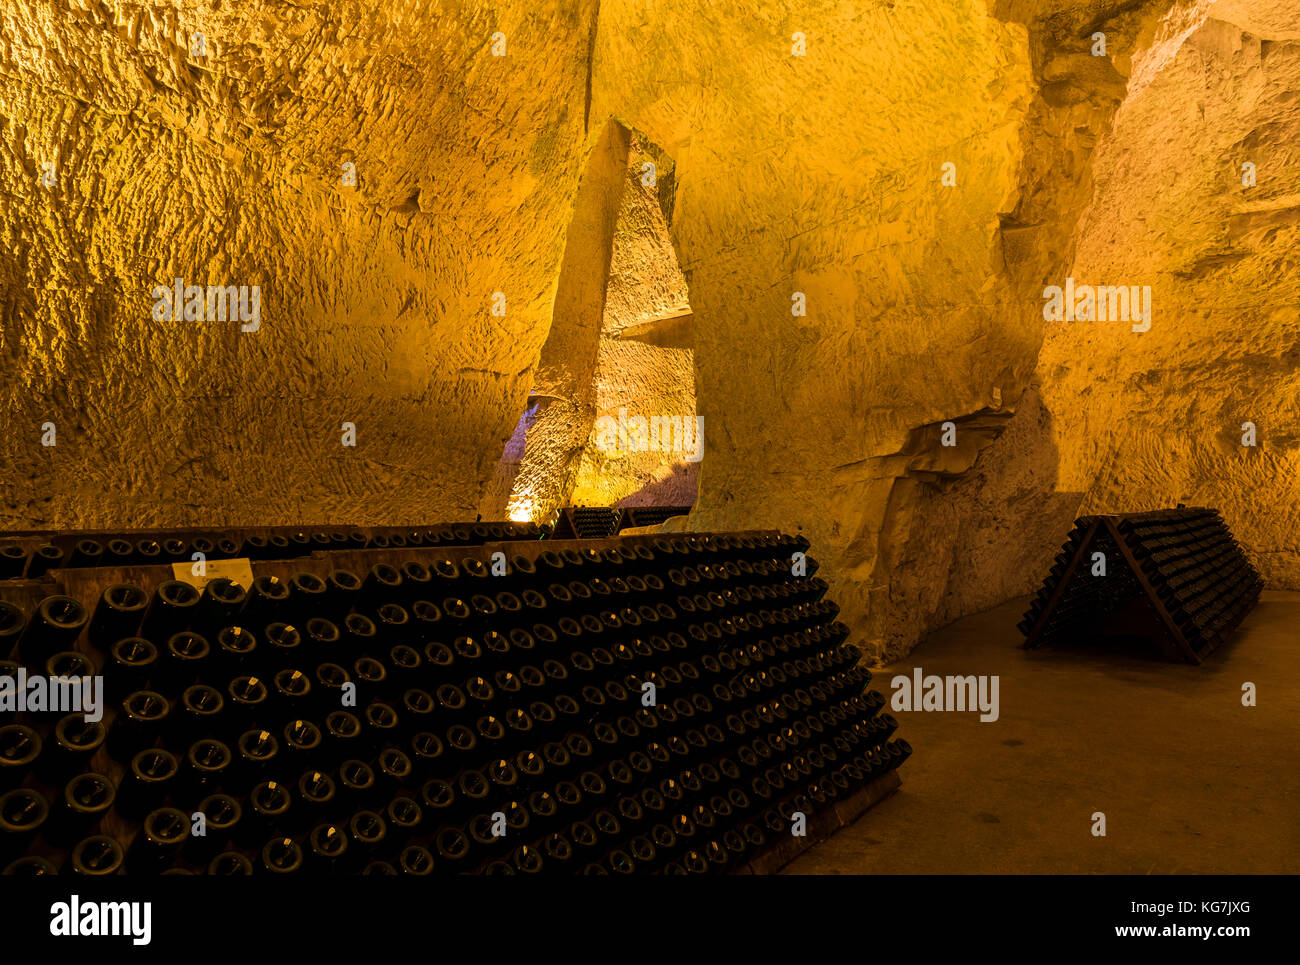 Reims, France - June 12, 2017: the caves of Champagne House Taittinger with old bottles Champagne in pupitres, France. Stock Photo